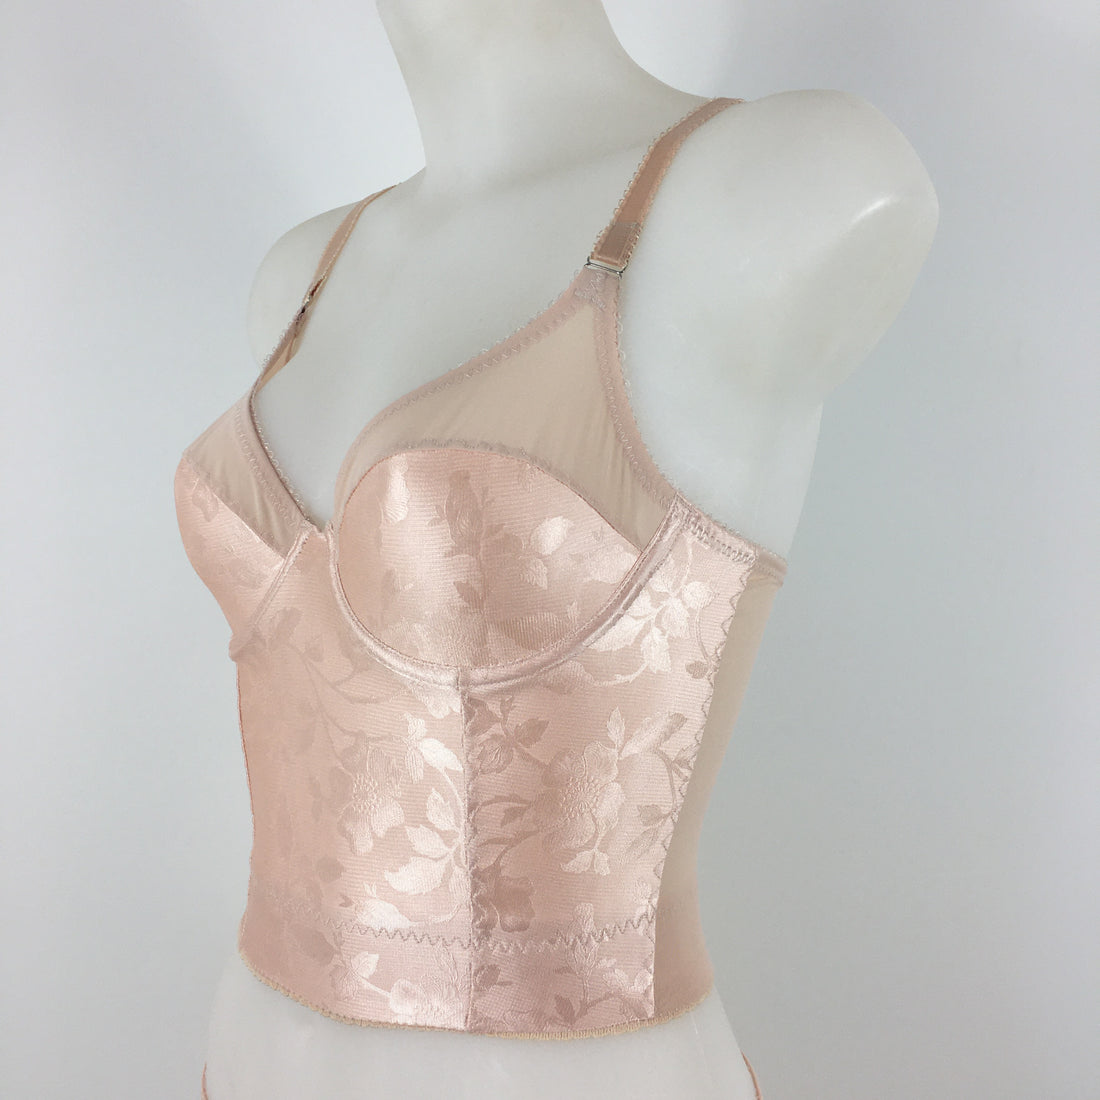 faux vintage 1950s lingerie by pip and pantalaimon. Vintage peachy satin longline bra, inspired by bullet bras, pairs with high waisted pantie girdle knickers with 6 detachable suspender straps with our signature split Y strap, 12 garter clips